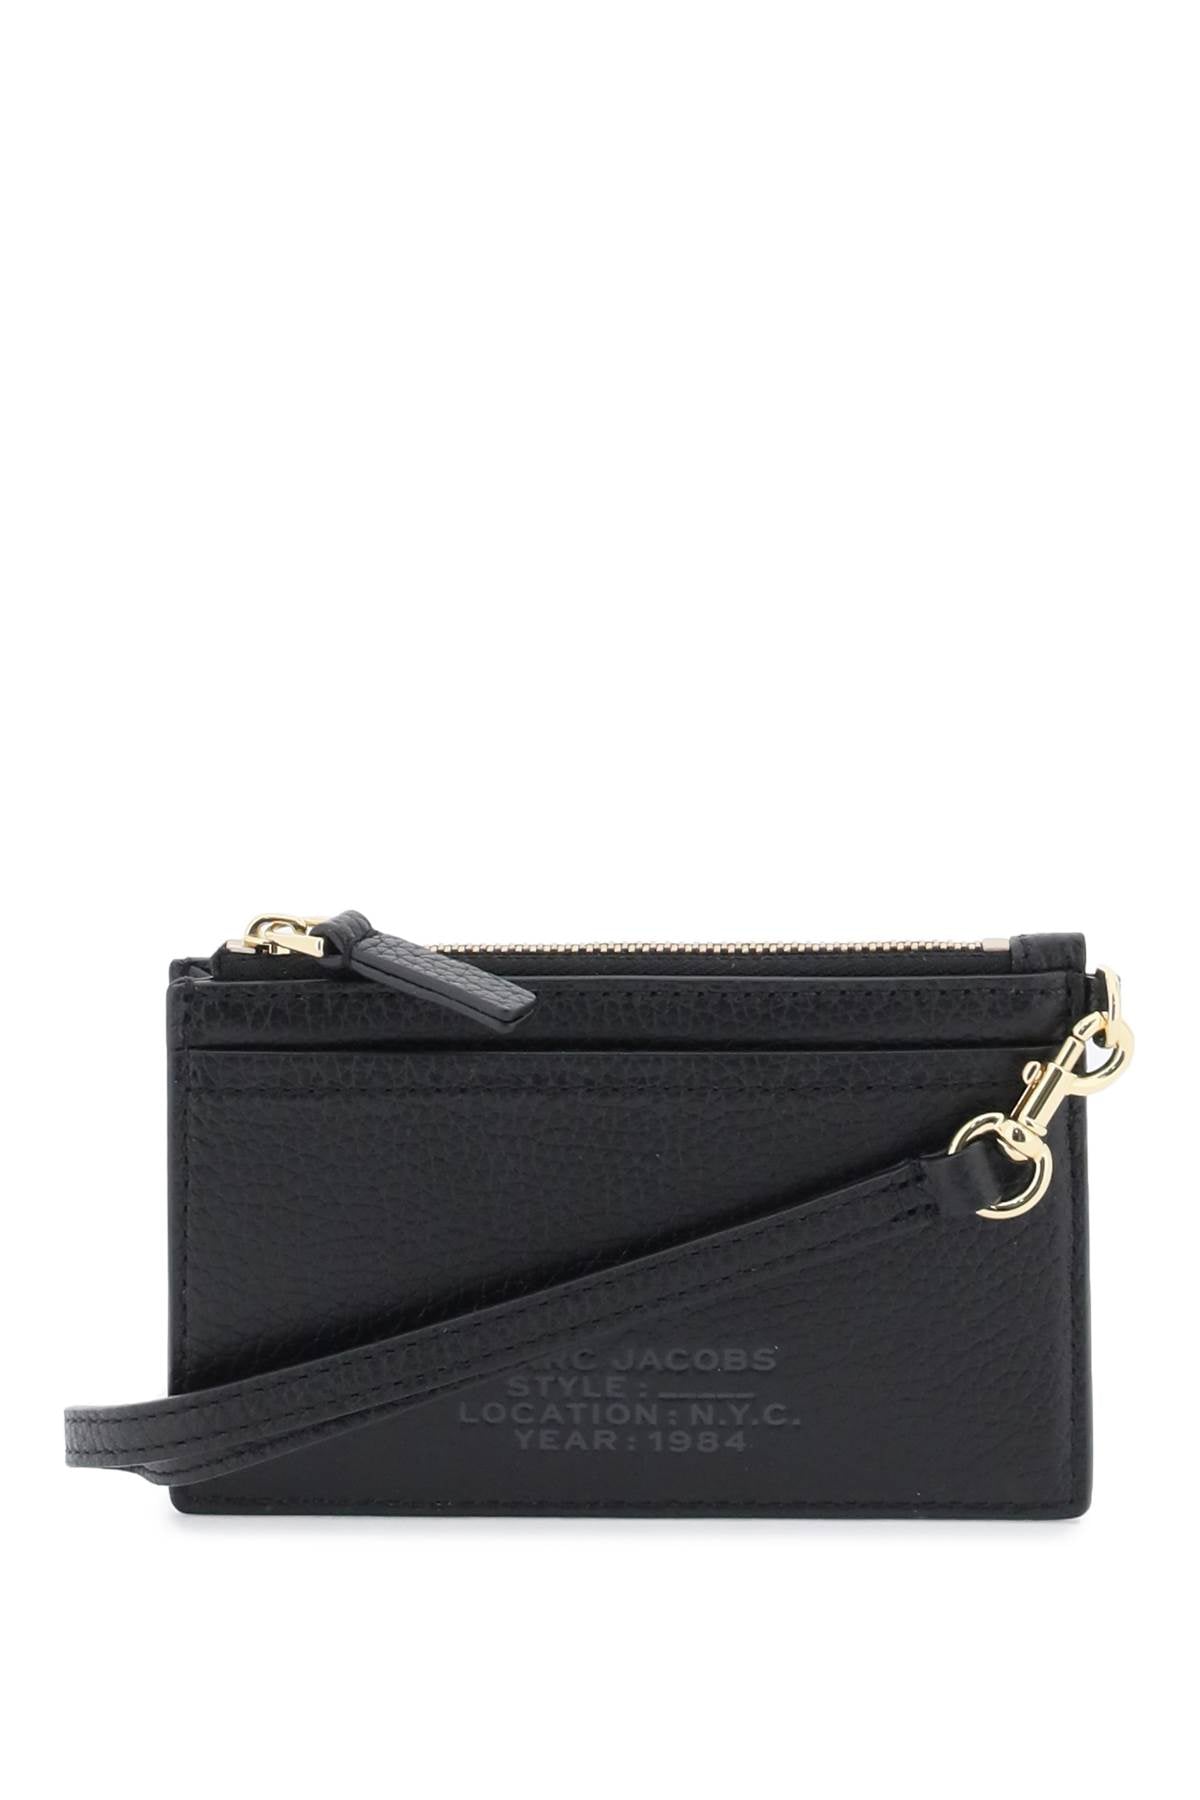 Marc jacobs the leather top zip wristlet-0